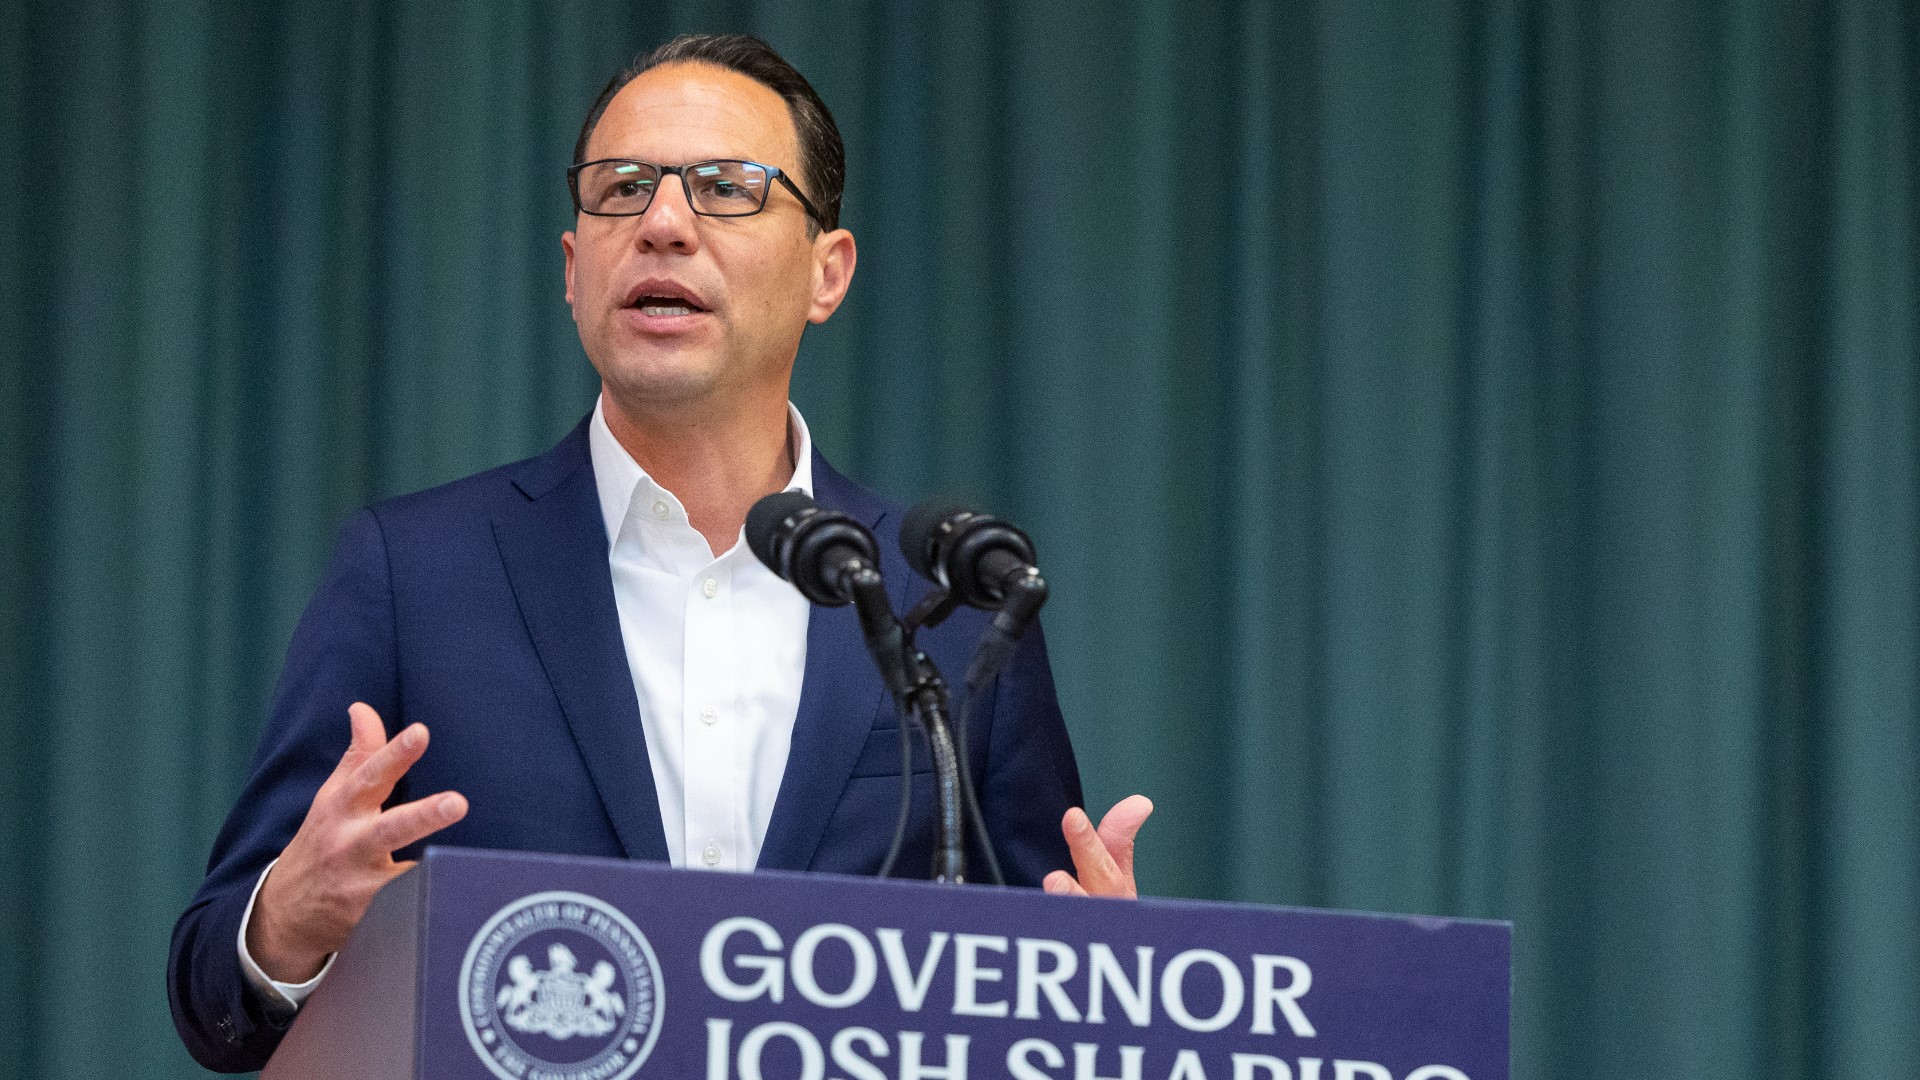 51% of Pennsylvanians approve of Josh Shapiro's handling of his job as governor in 2023, according to a recent Muhlenberg College poll.